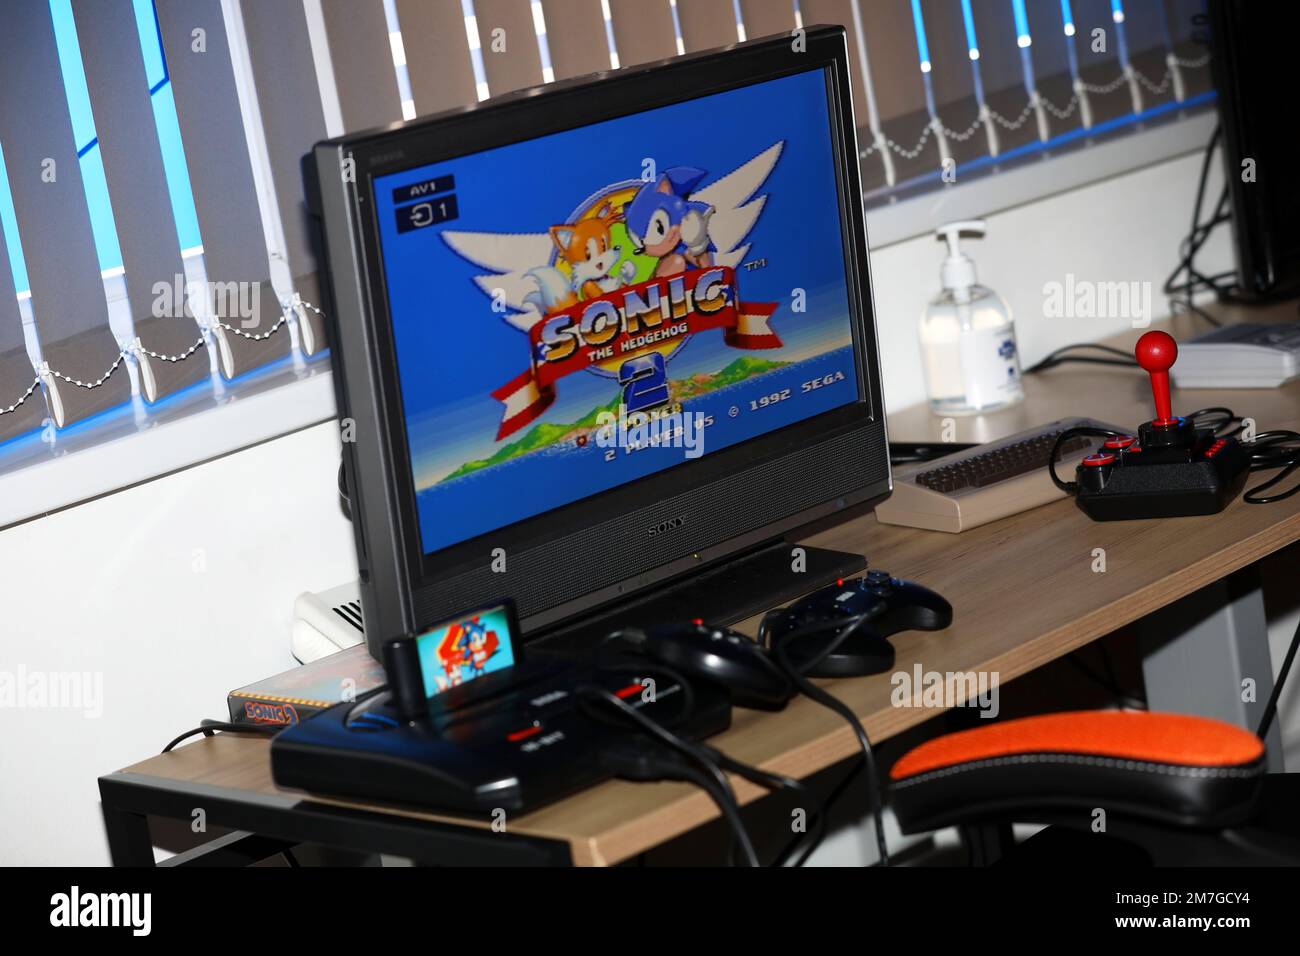 An old Sega Megadrive games console pictured connected up to a TV with Sonic the Hedgehog game plugged in to play. Havant, Hampshire, UK. Stock Photo